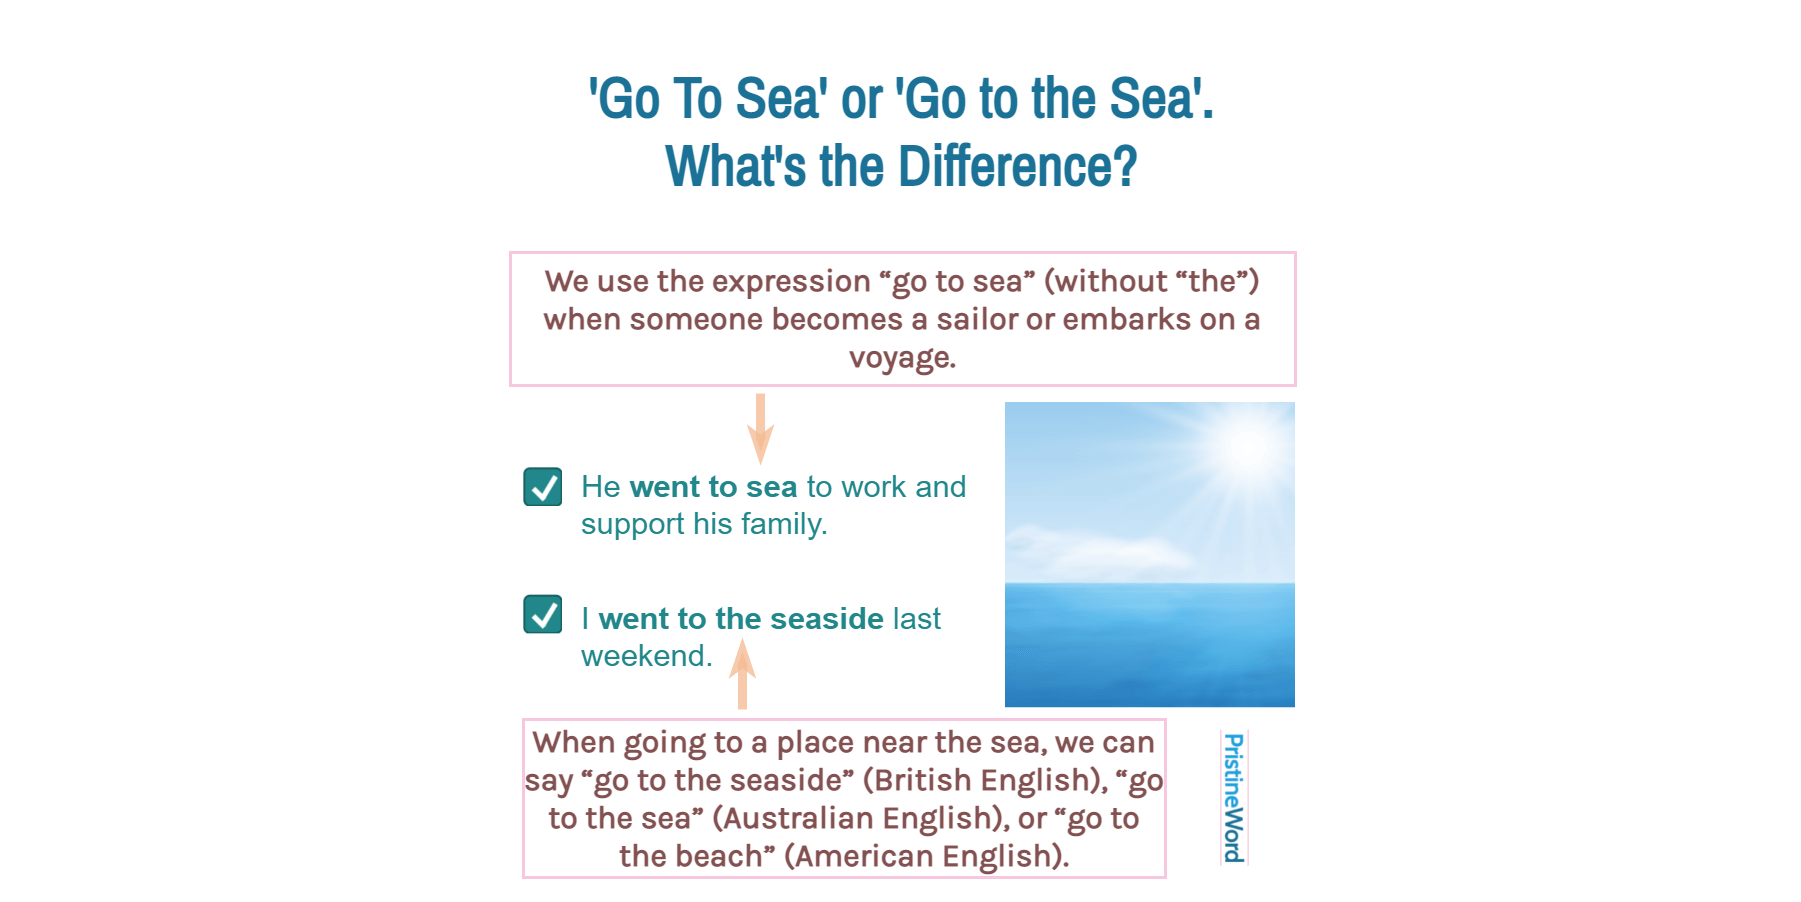 'Go To Sea' vs. 'Go to the Sea'. What's the Difference?